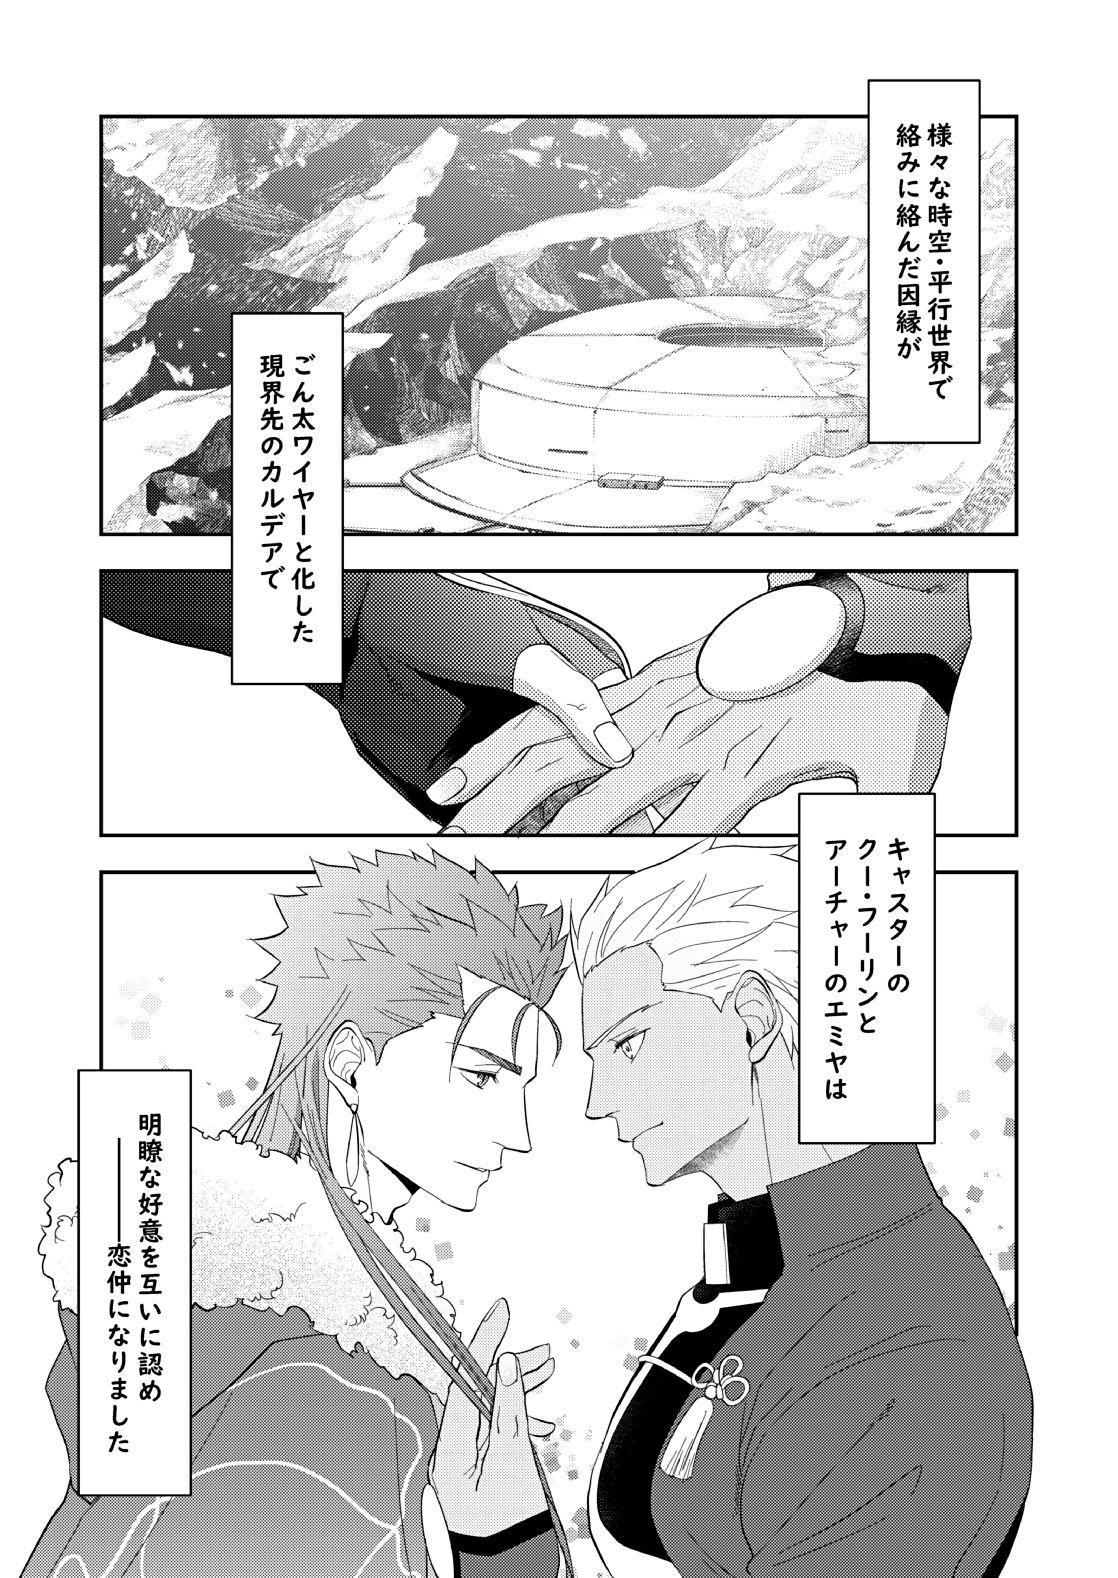 Huge Ass deification - Fate grand order Rough - Page 3